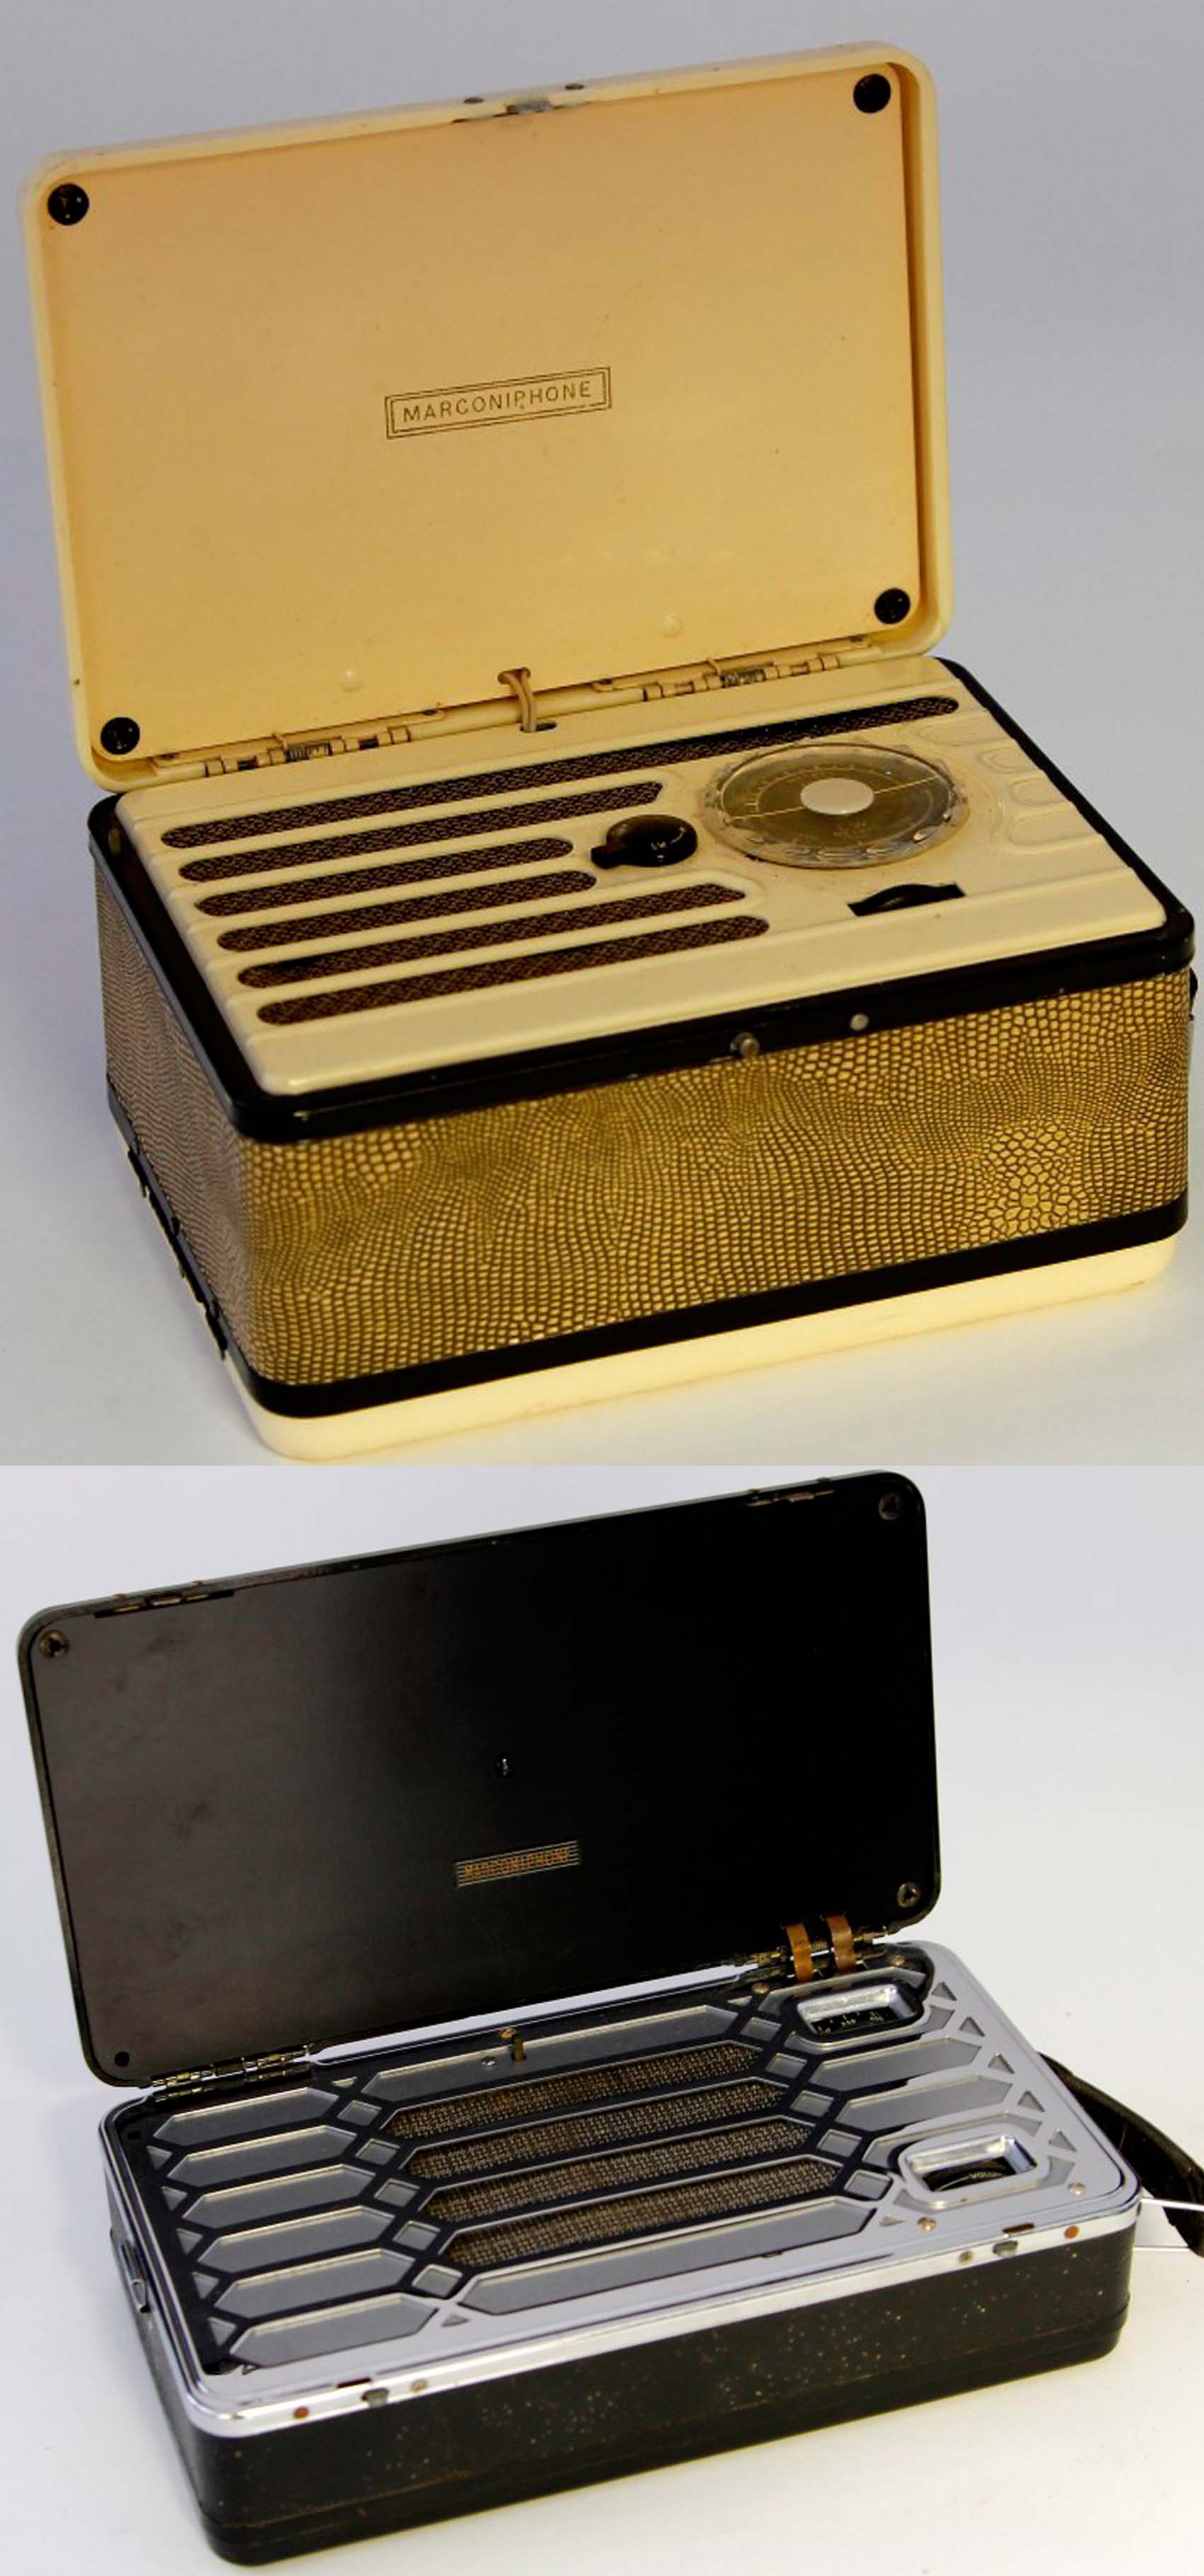 A 1940s Marconiphone P17B personal radio, together with a 1940s Marconiphone PZ0B personal radio